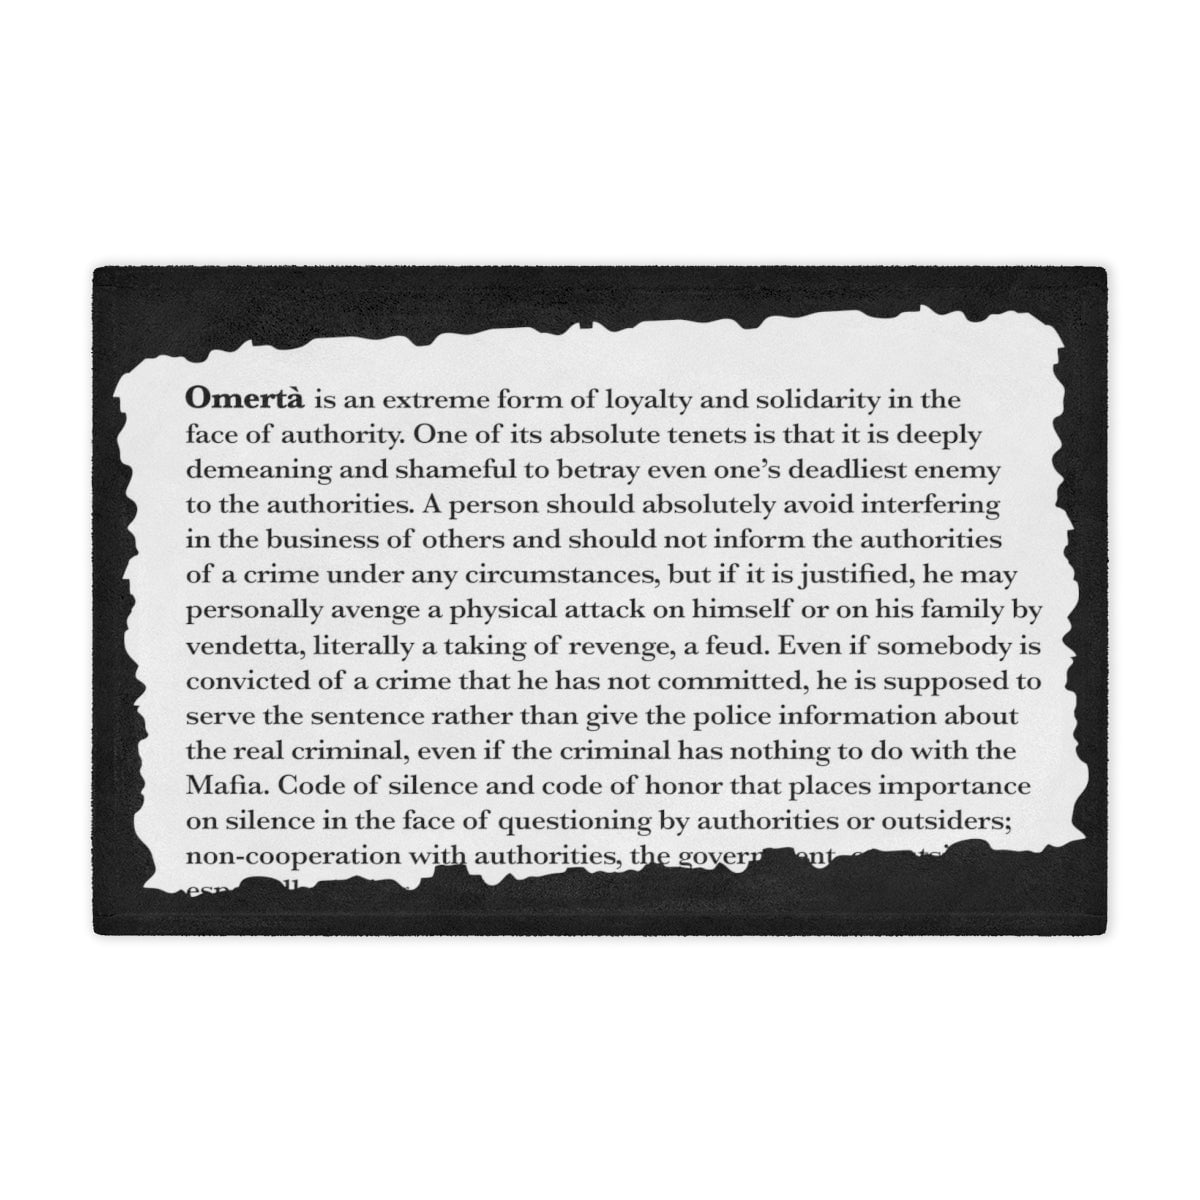 Omerta Respect Loyalty Honor Minky Blanket - Wrap Yourself in the Code of Silence